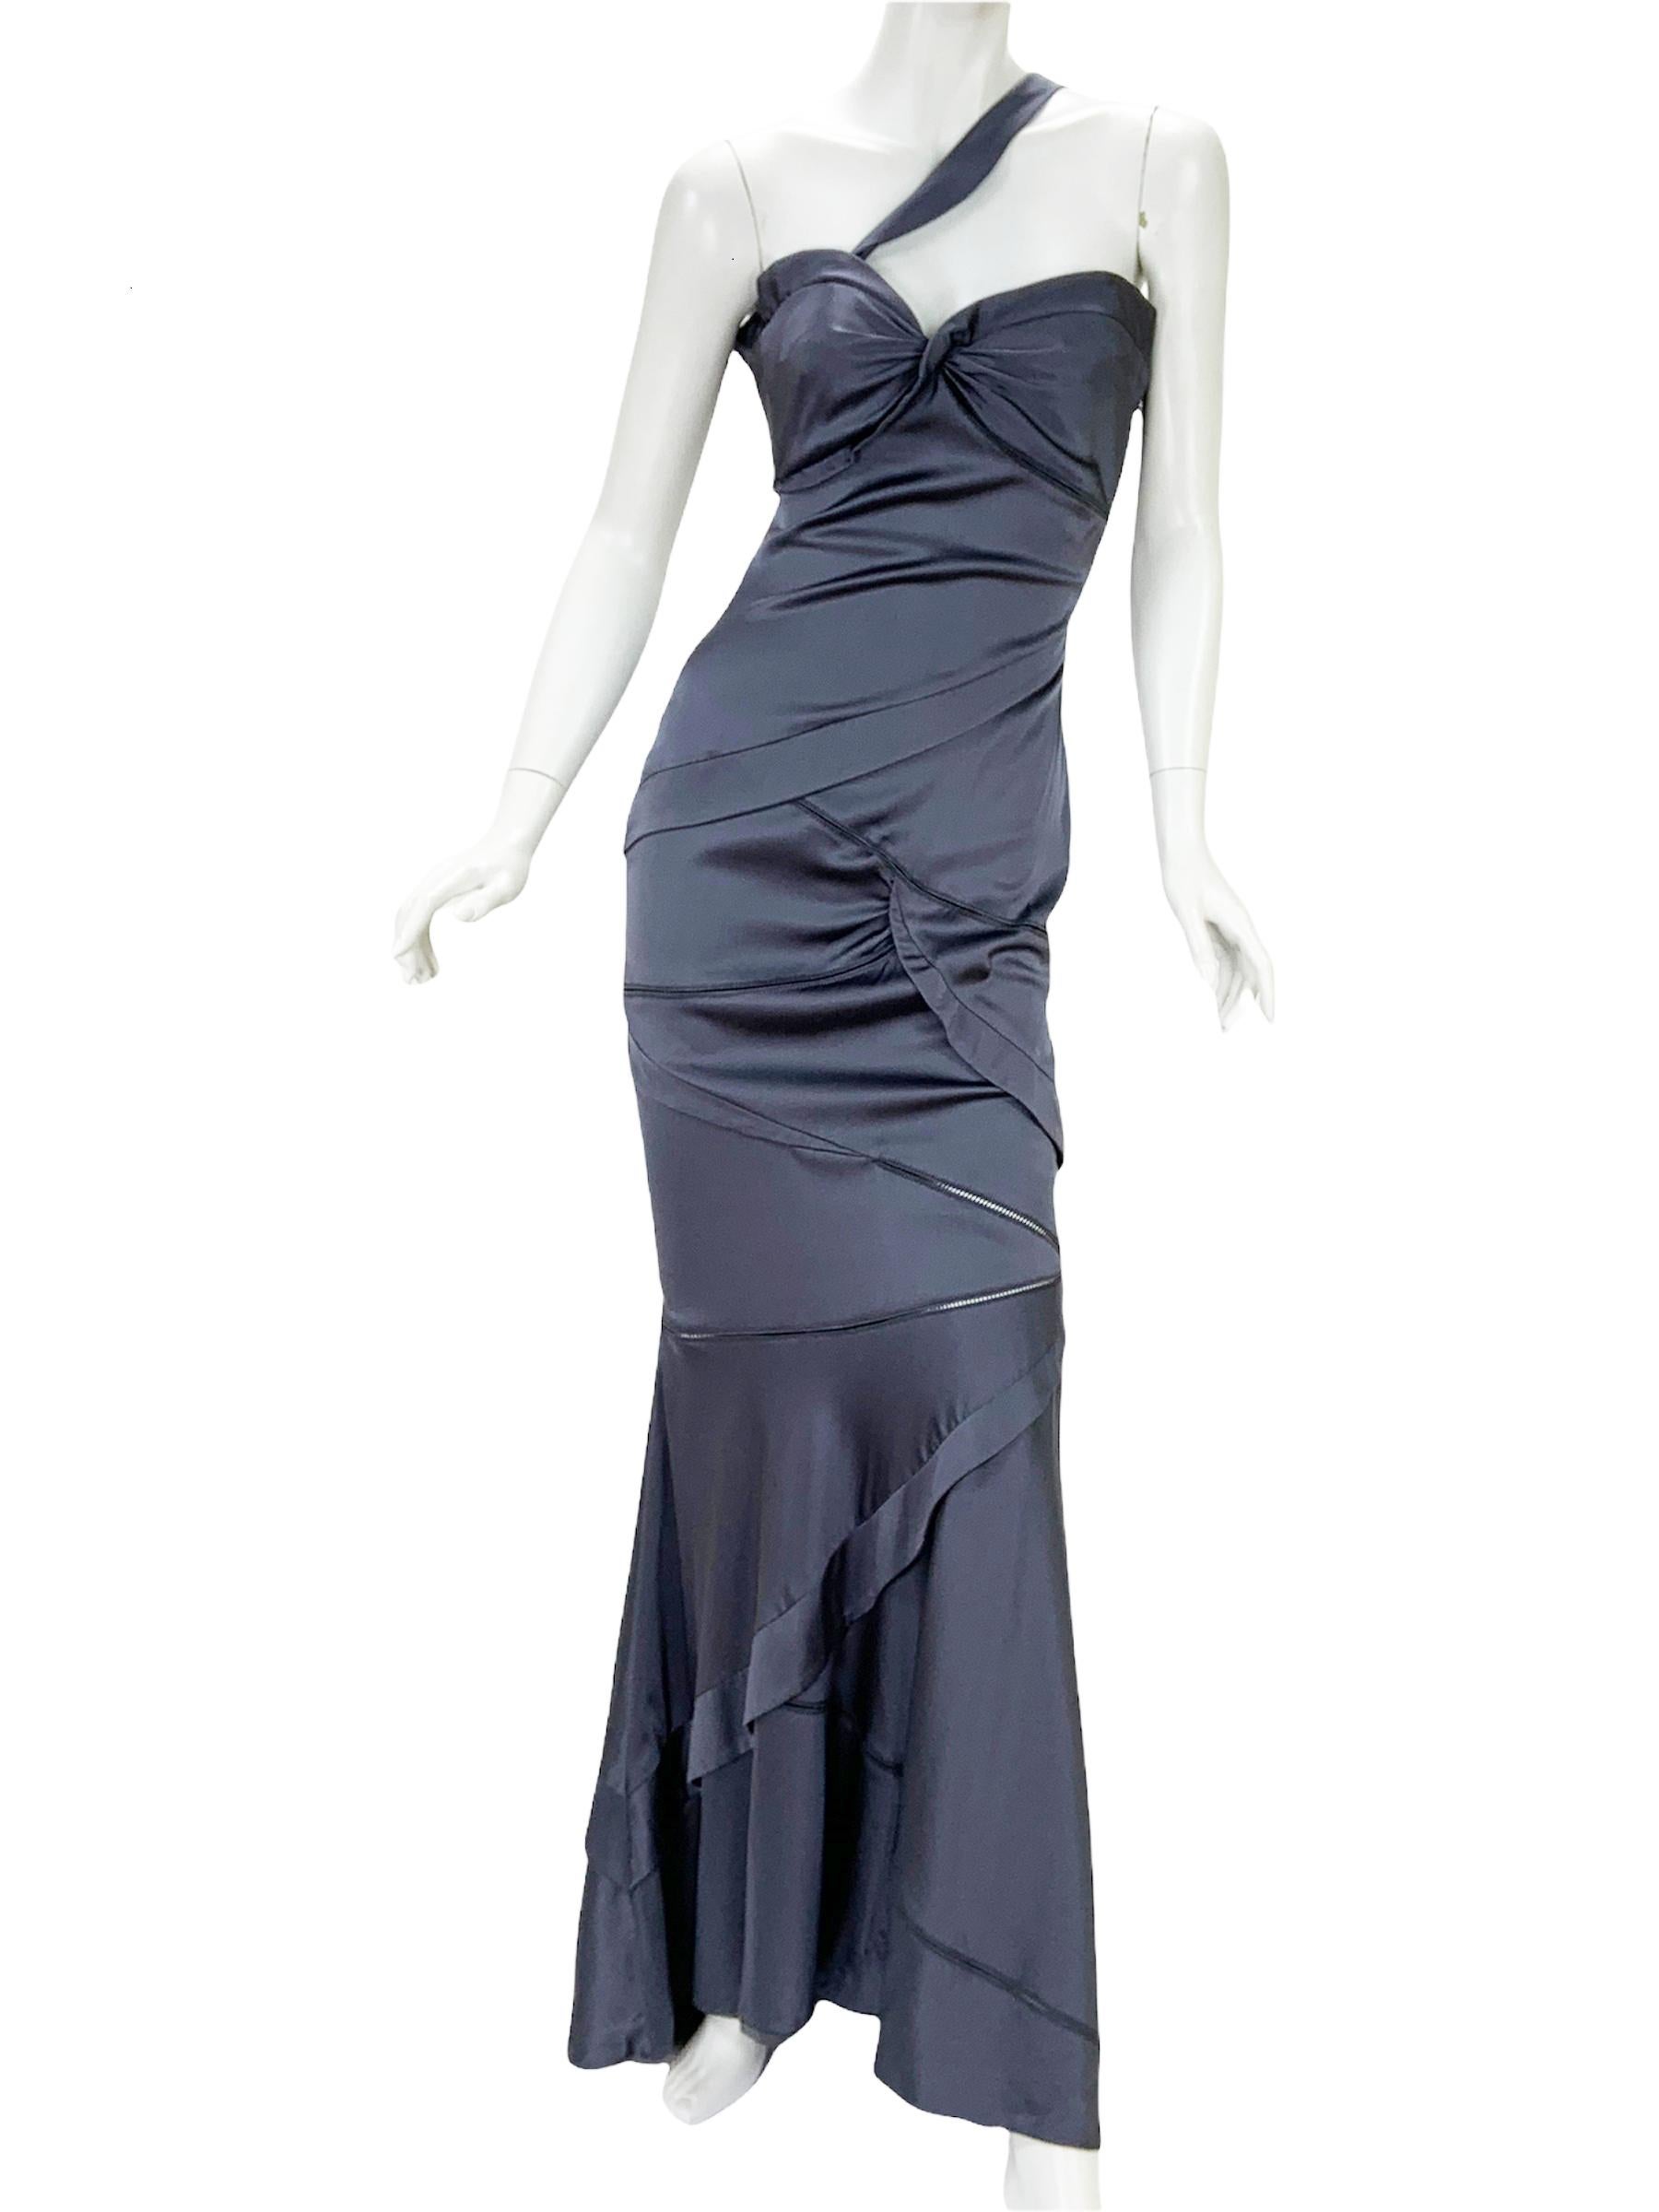 Tom Ford for Gucci Stretch Silk Gray Cut Out Dress Gown
2005 Collection
Designer size - 42
Same Dress in Blue Color Nicole Kidman Was Wearing for the 62nd Annual Golden Globe Awards.
Beautiful Graphite Gray Color, Cut Out and Open Back, Build- in